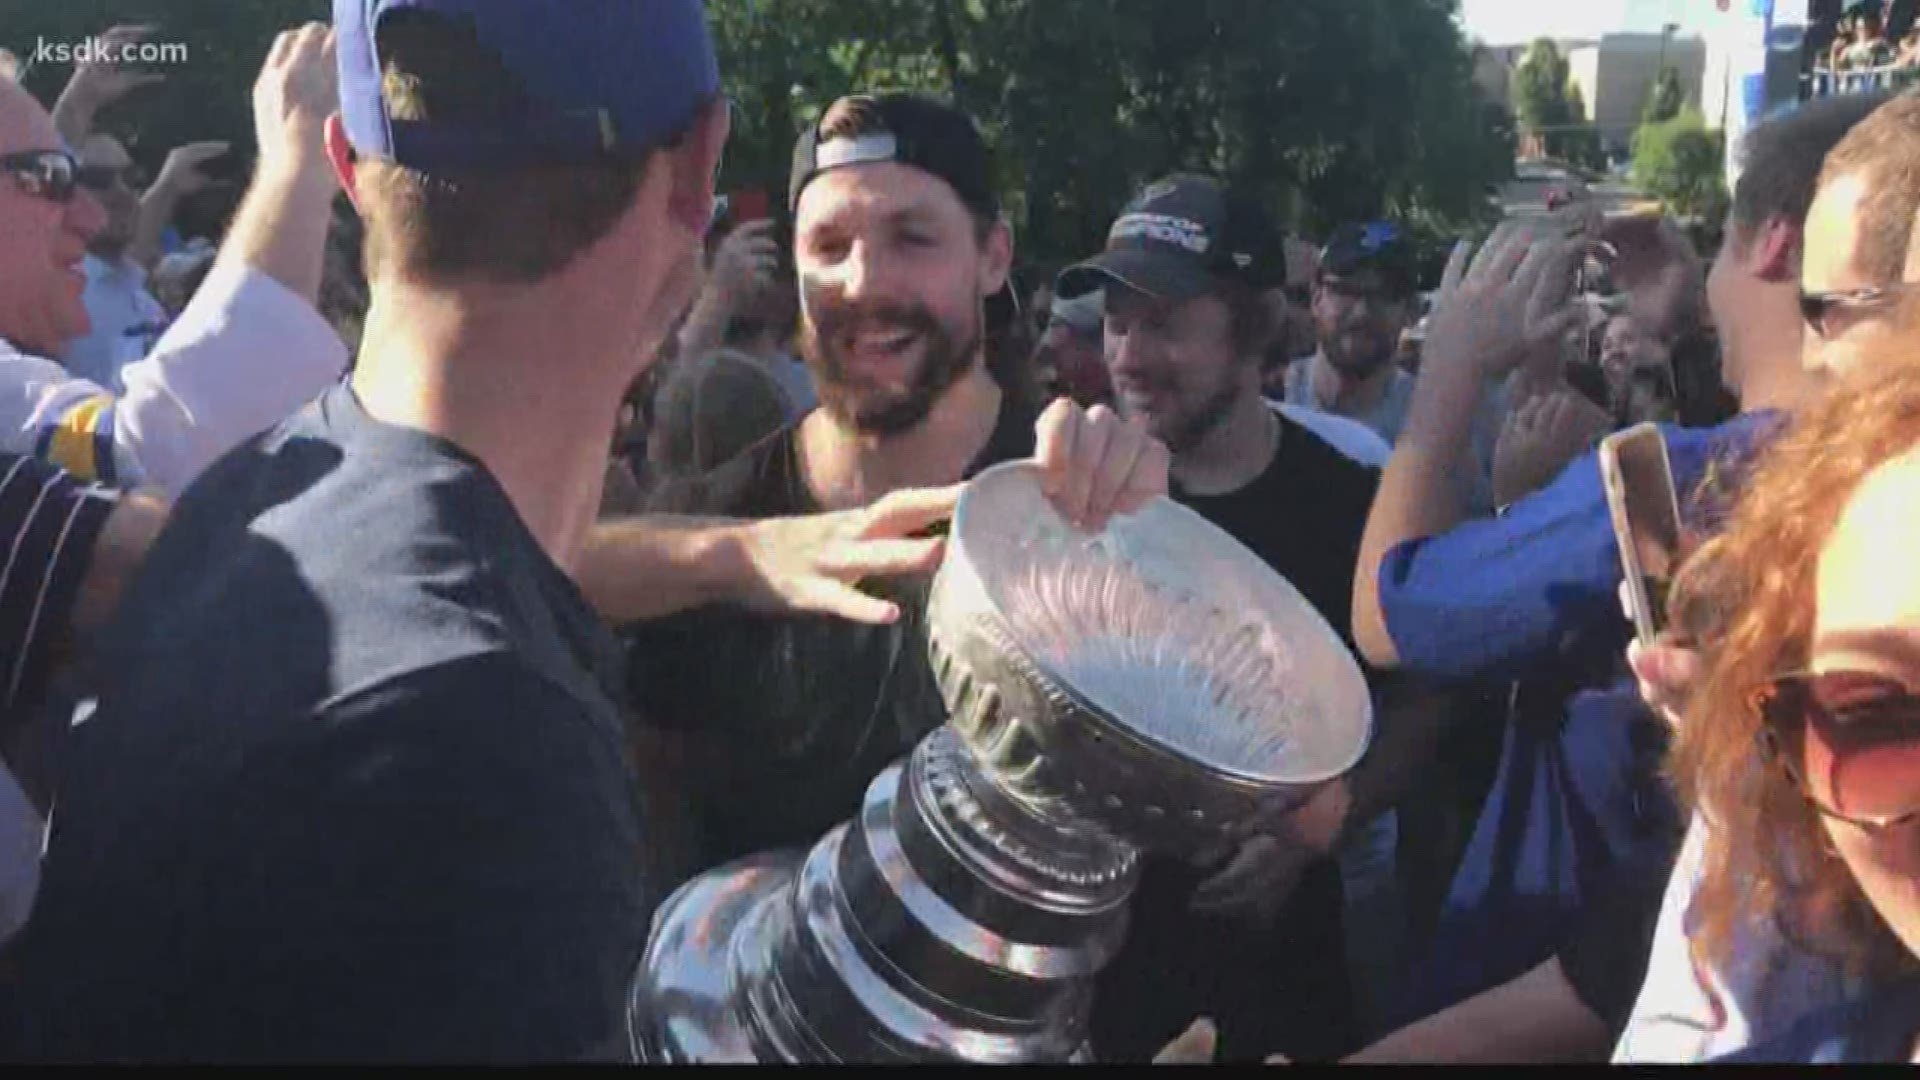 How Did the Stanley Cup Get Started?